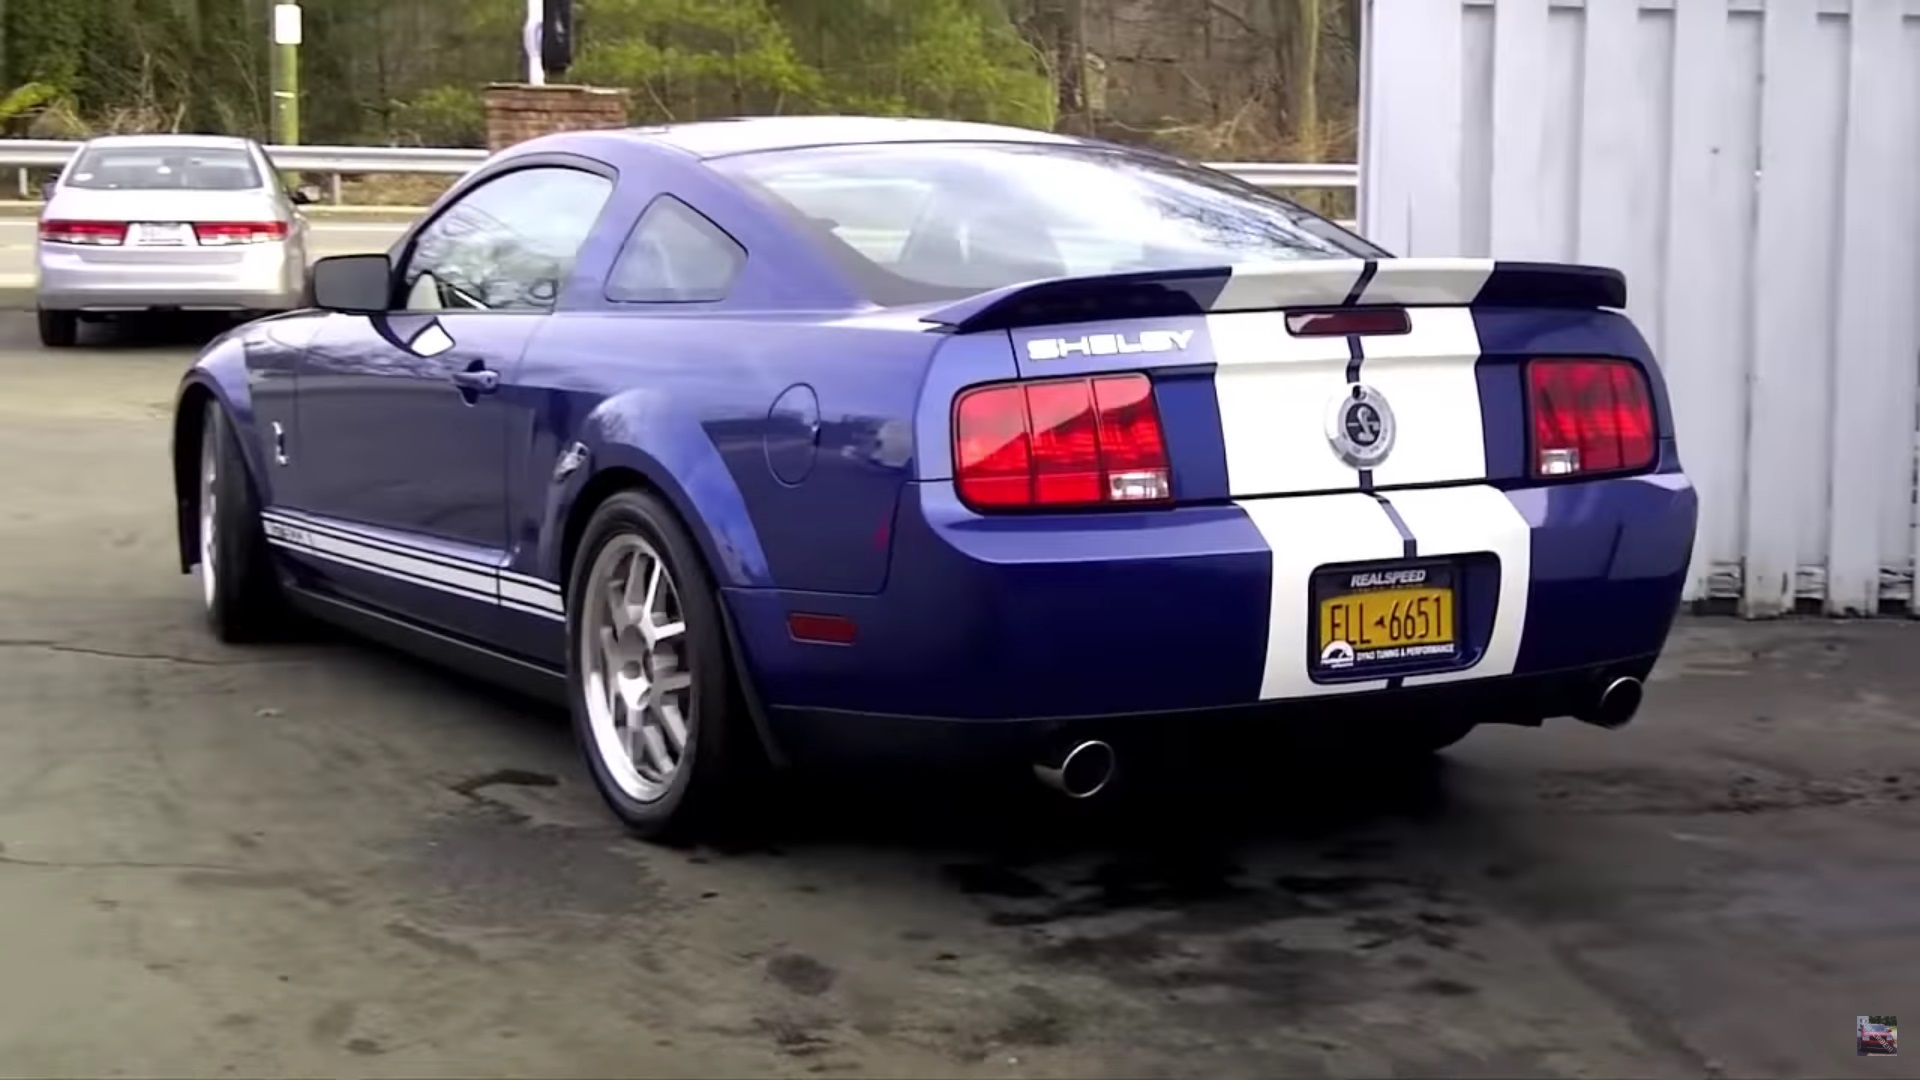 Video: 2007 Ford Mustang Shelby GT-500 With Flowmaster Exhaust Sound